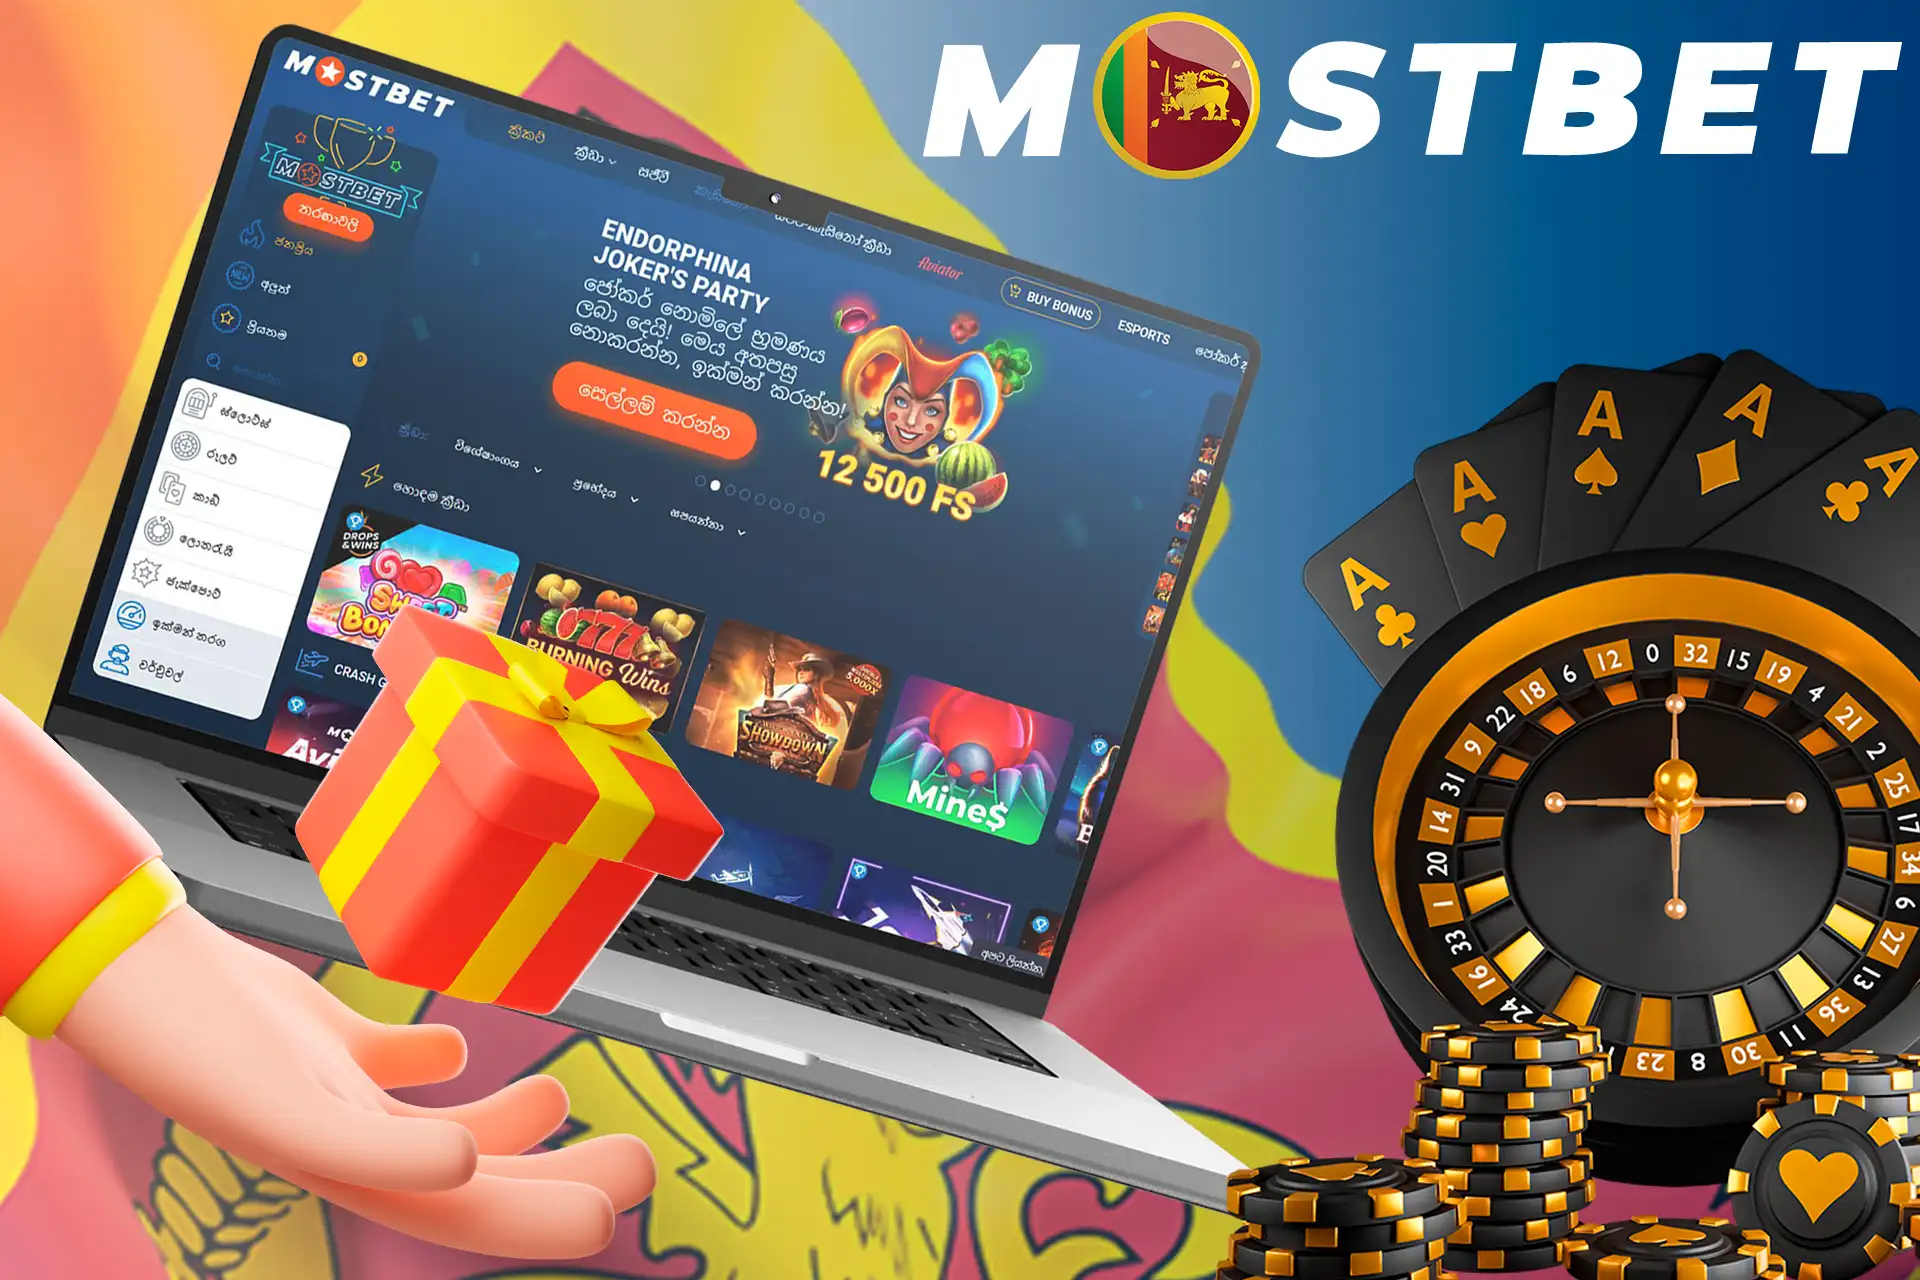 Check out the Casino section at Mostbet Sri Lanka and get your welcome bonus